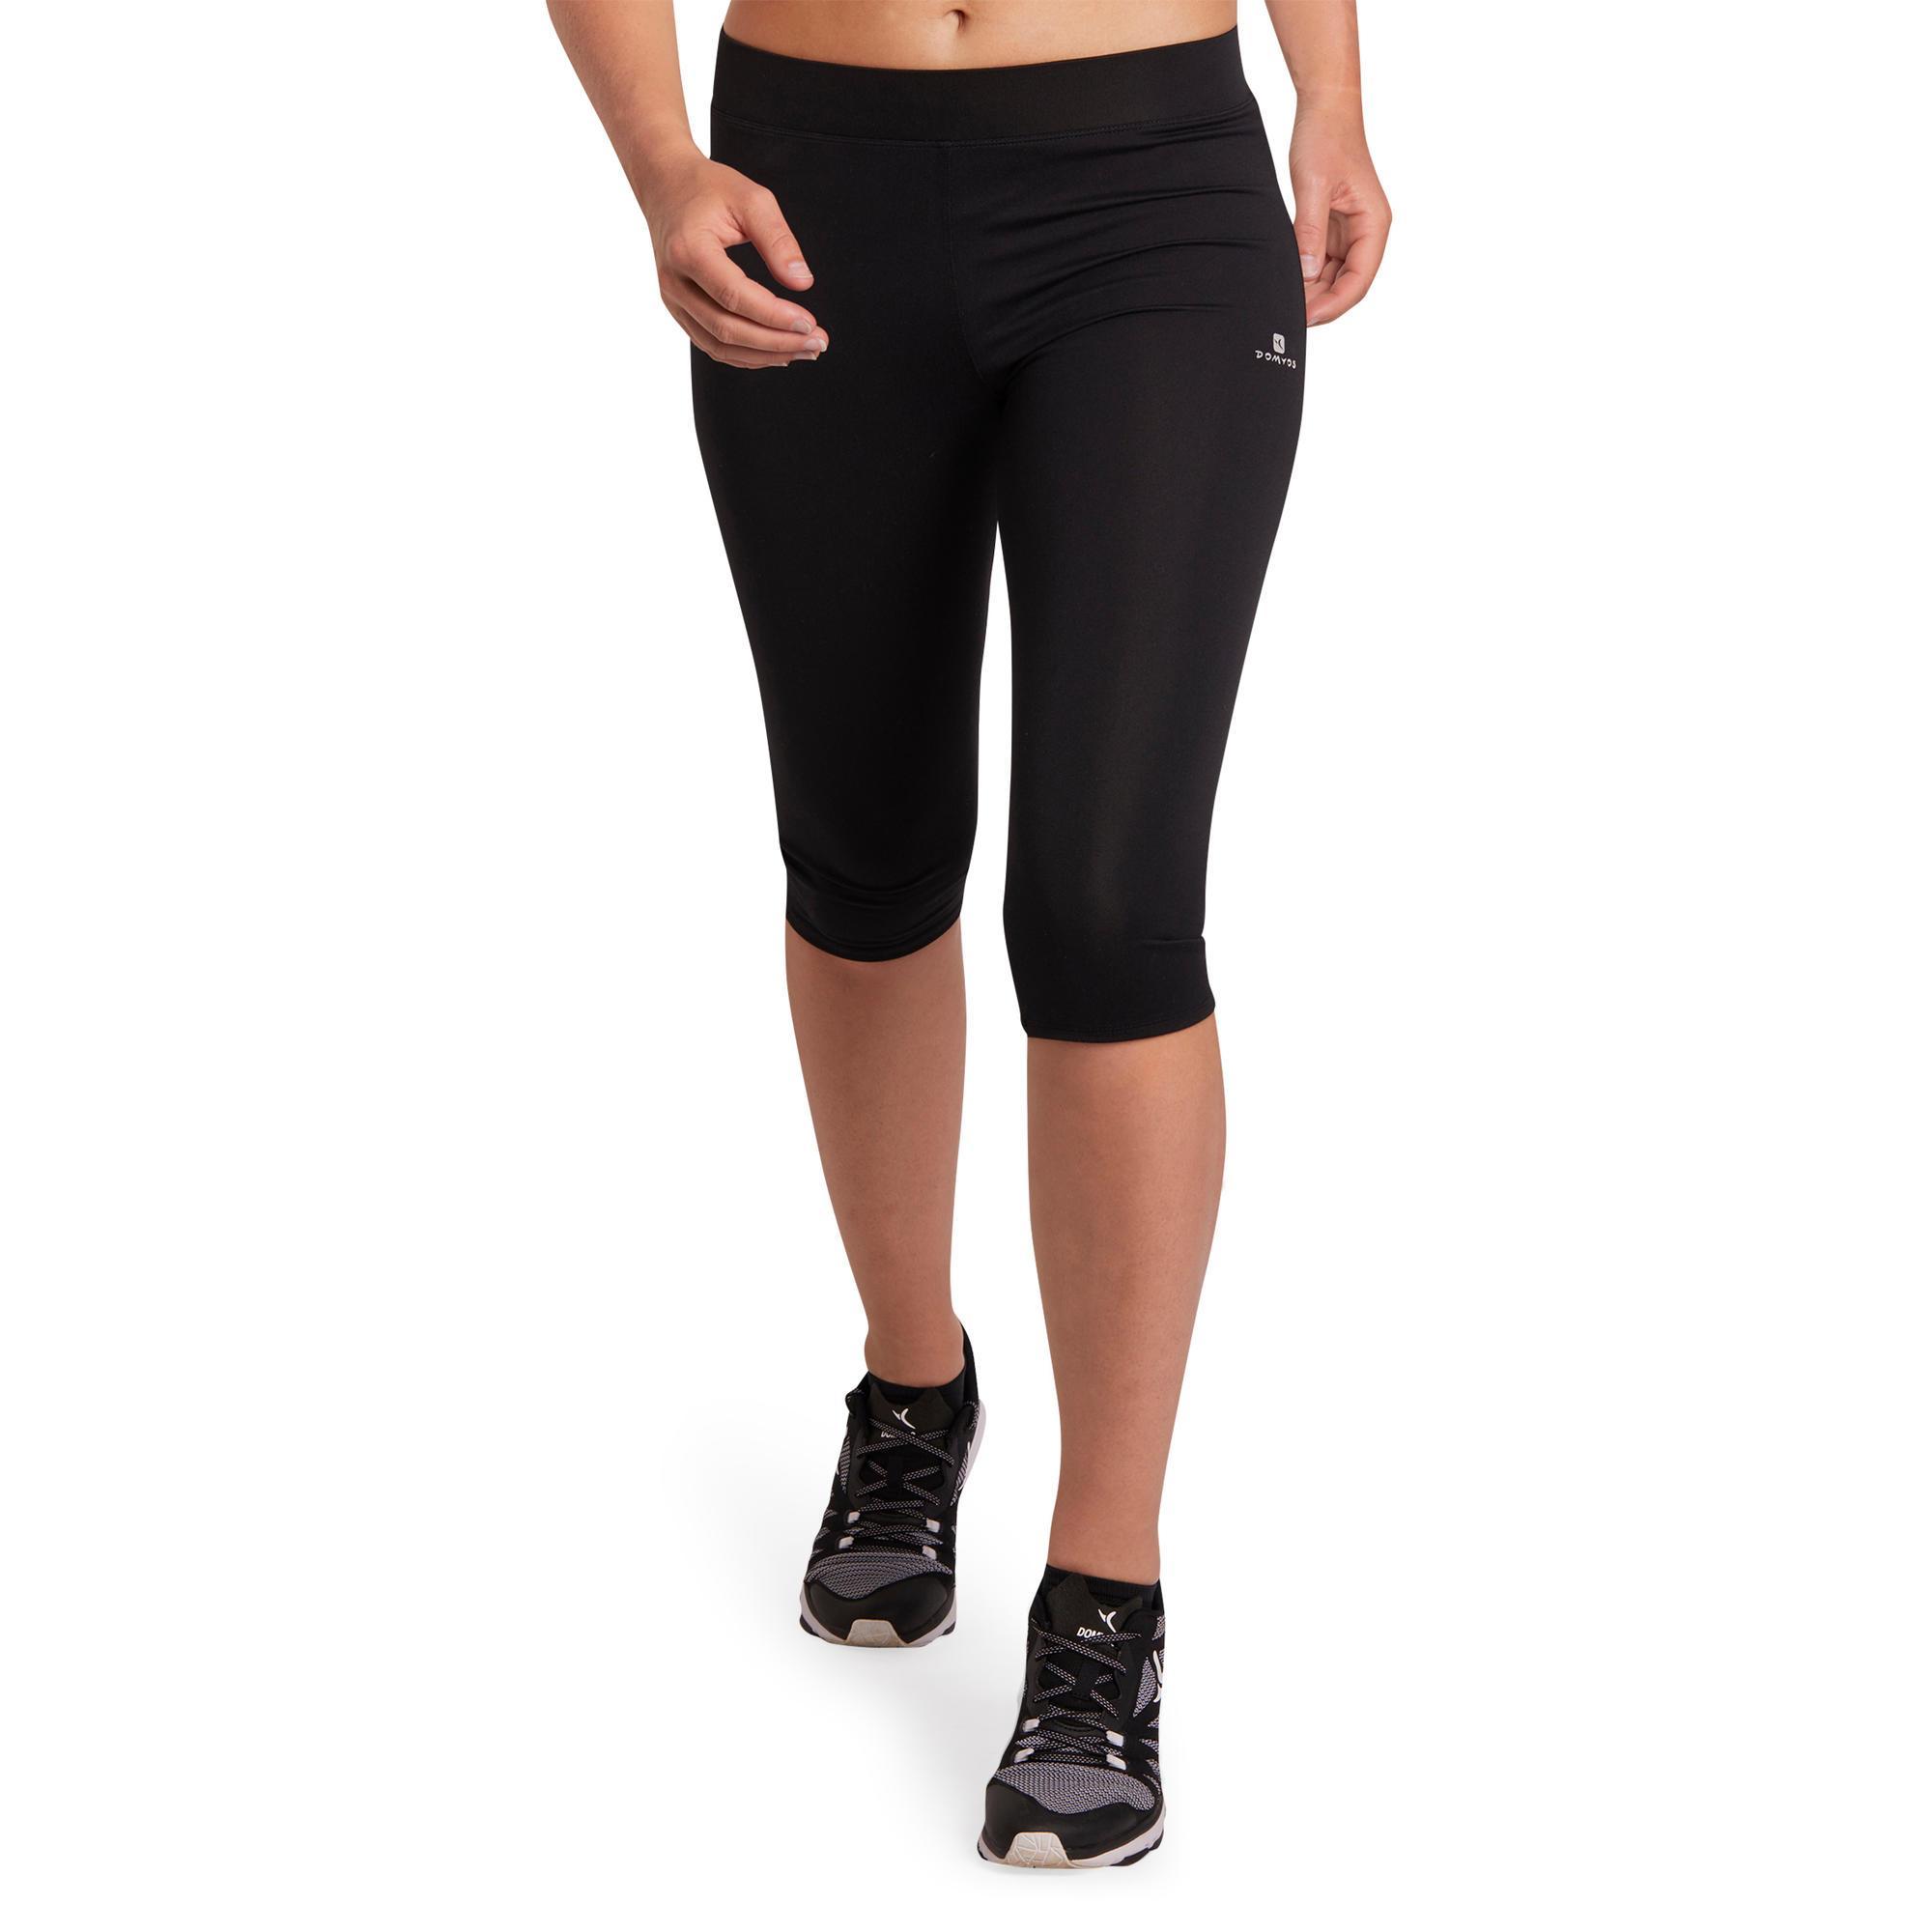 Cardio Fitness Cropped Bottoms - Black 